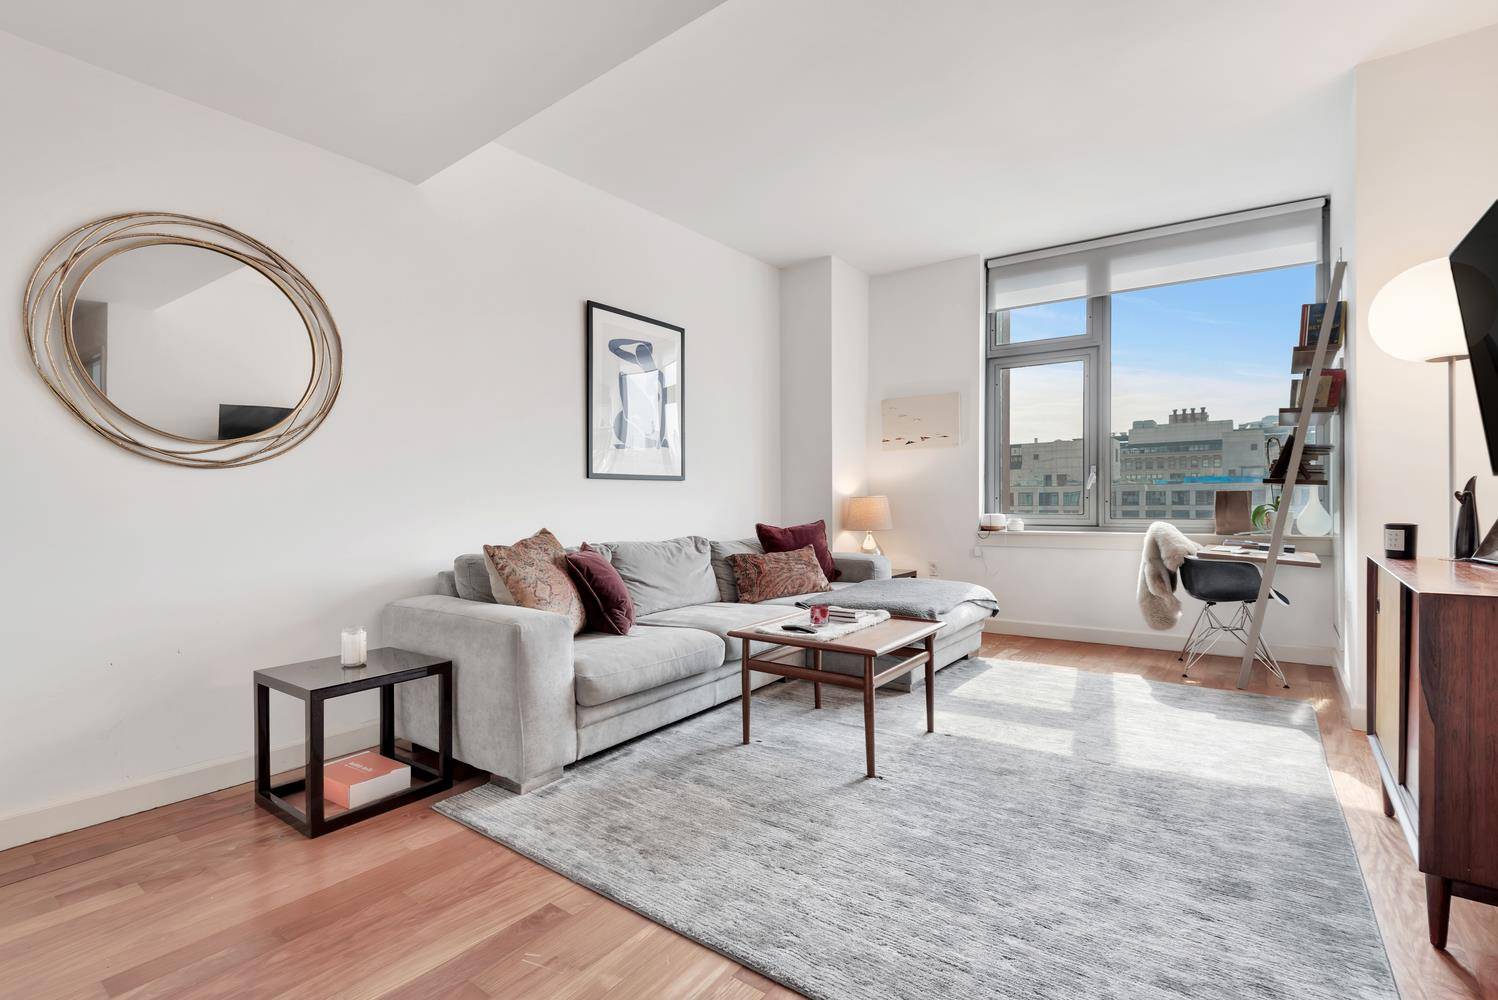 Residence 12L is a spacious one bedroom with unobstructed western views of downtown Manhattan and the Freedom Tower.